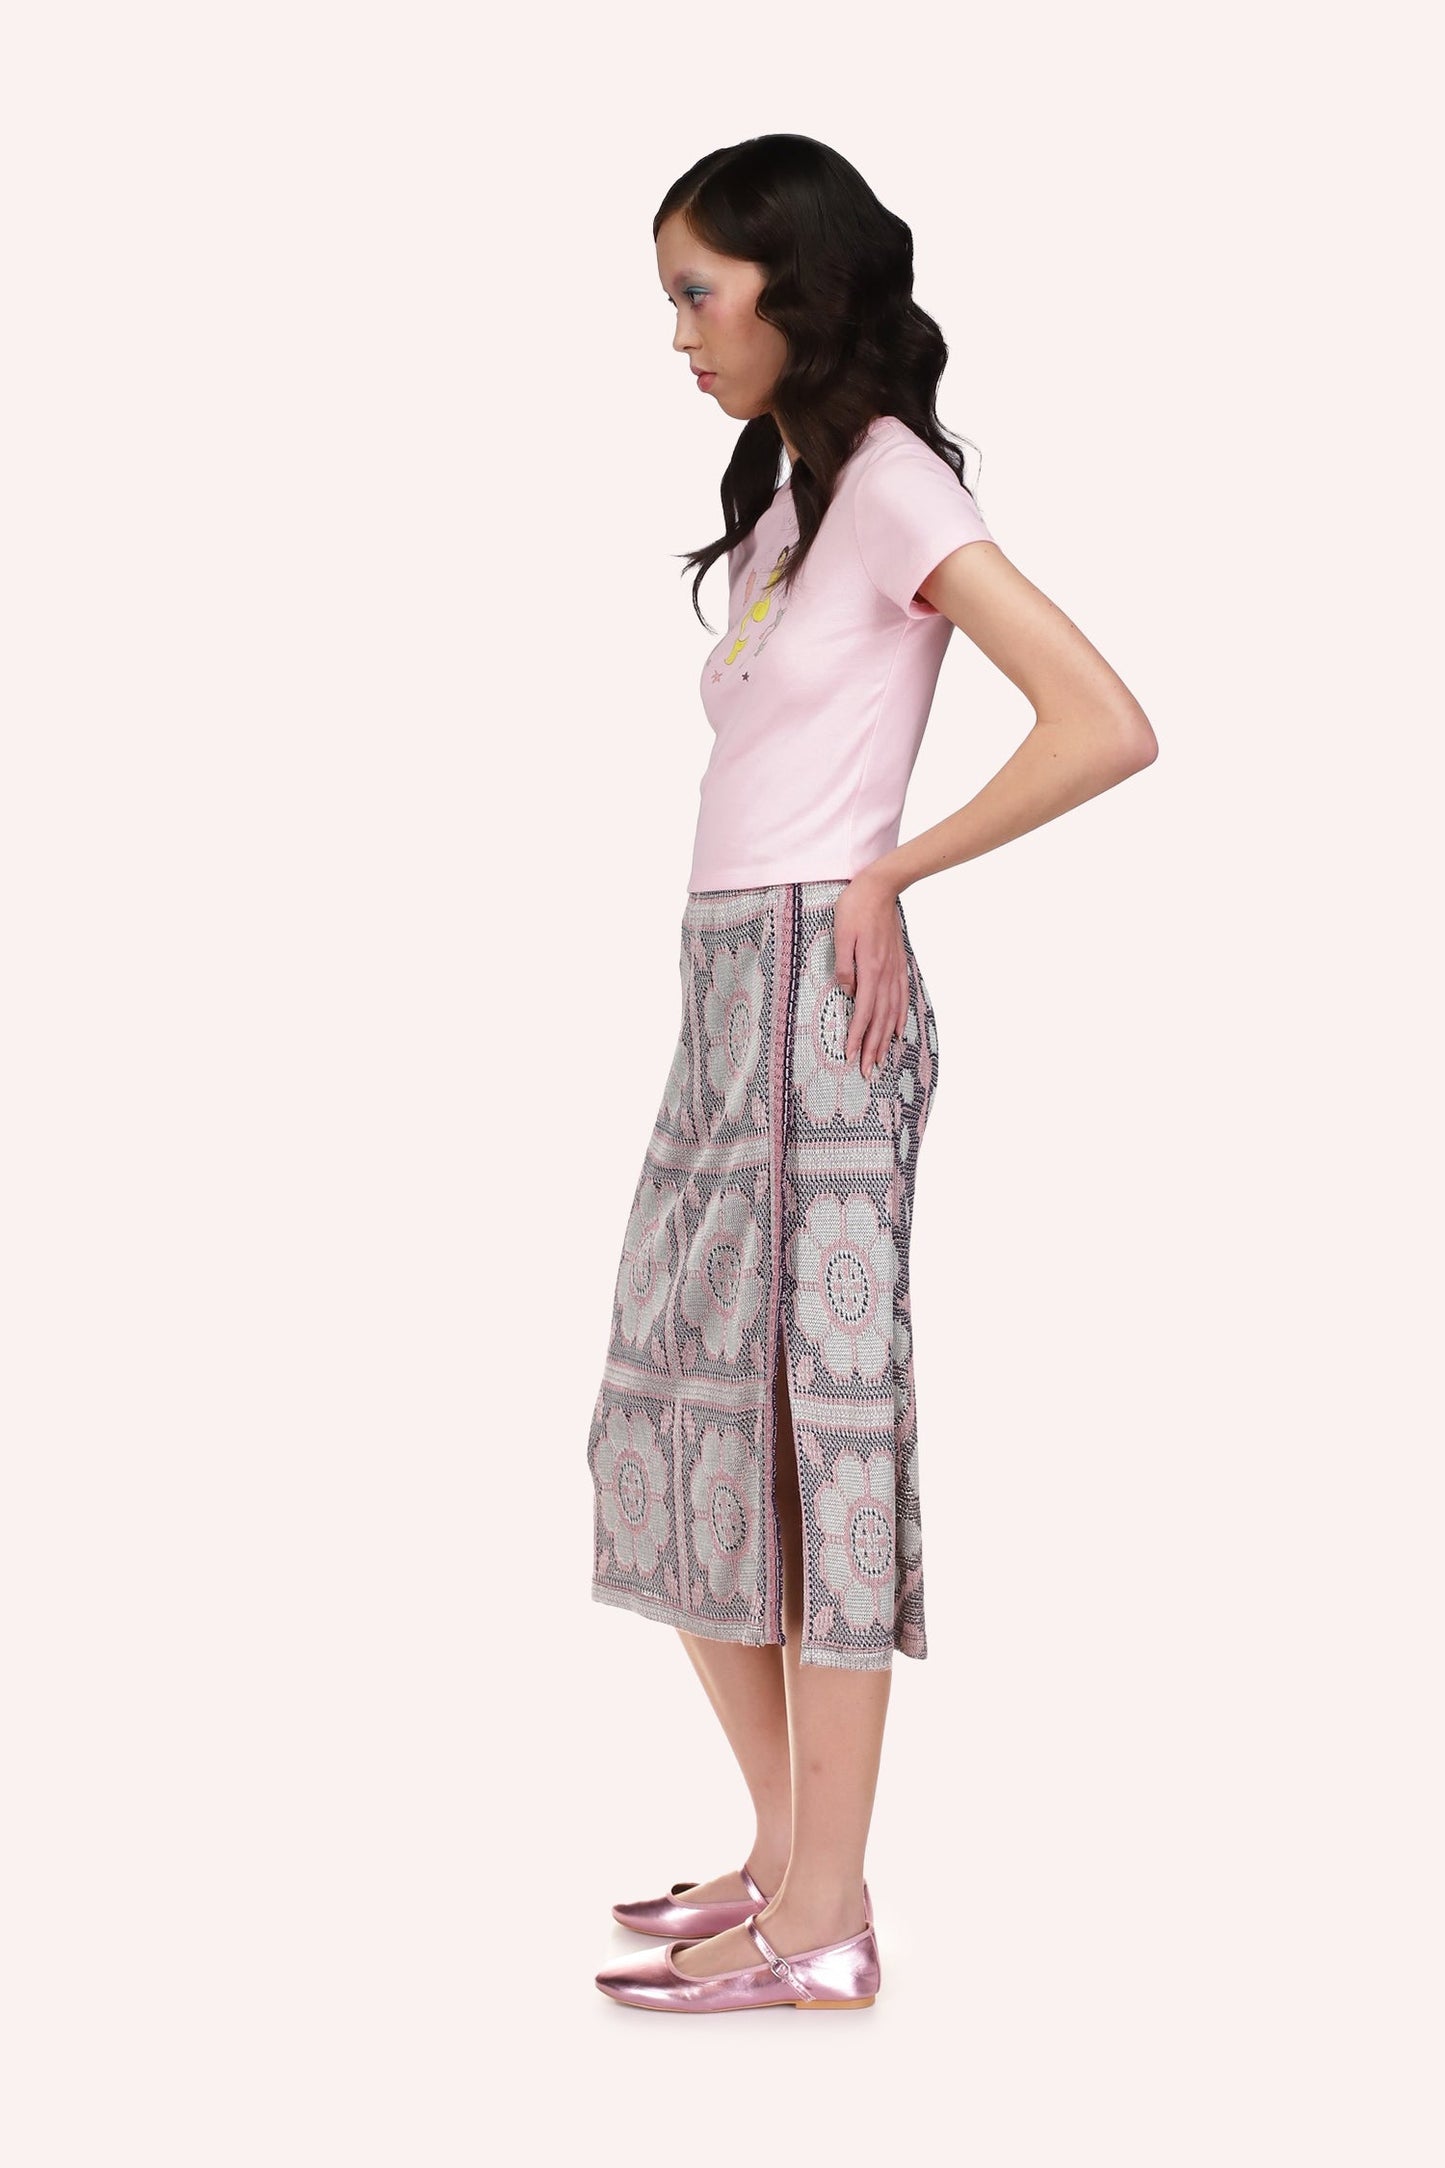 Opalescent Knit Skirt, under knee long, with opening on the left side from knee down